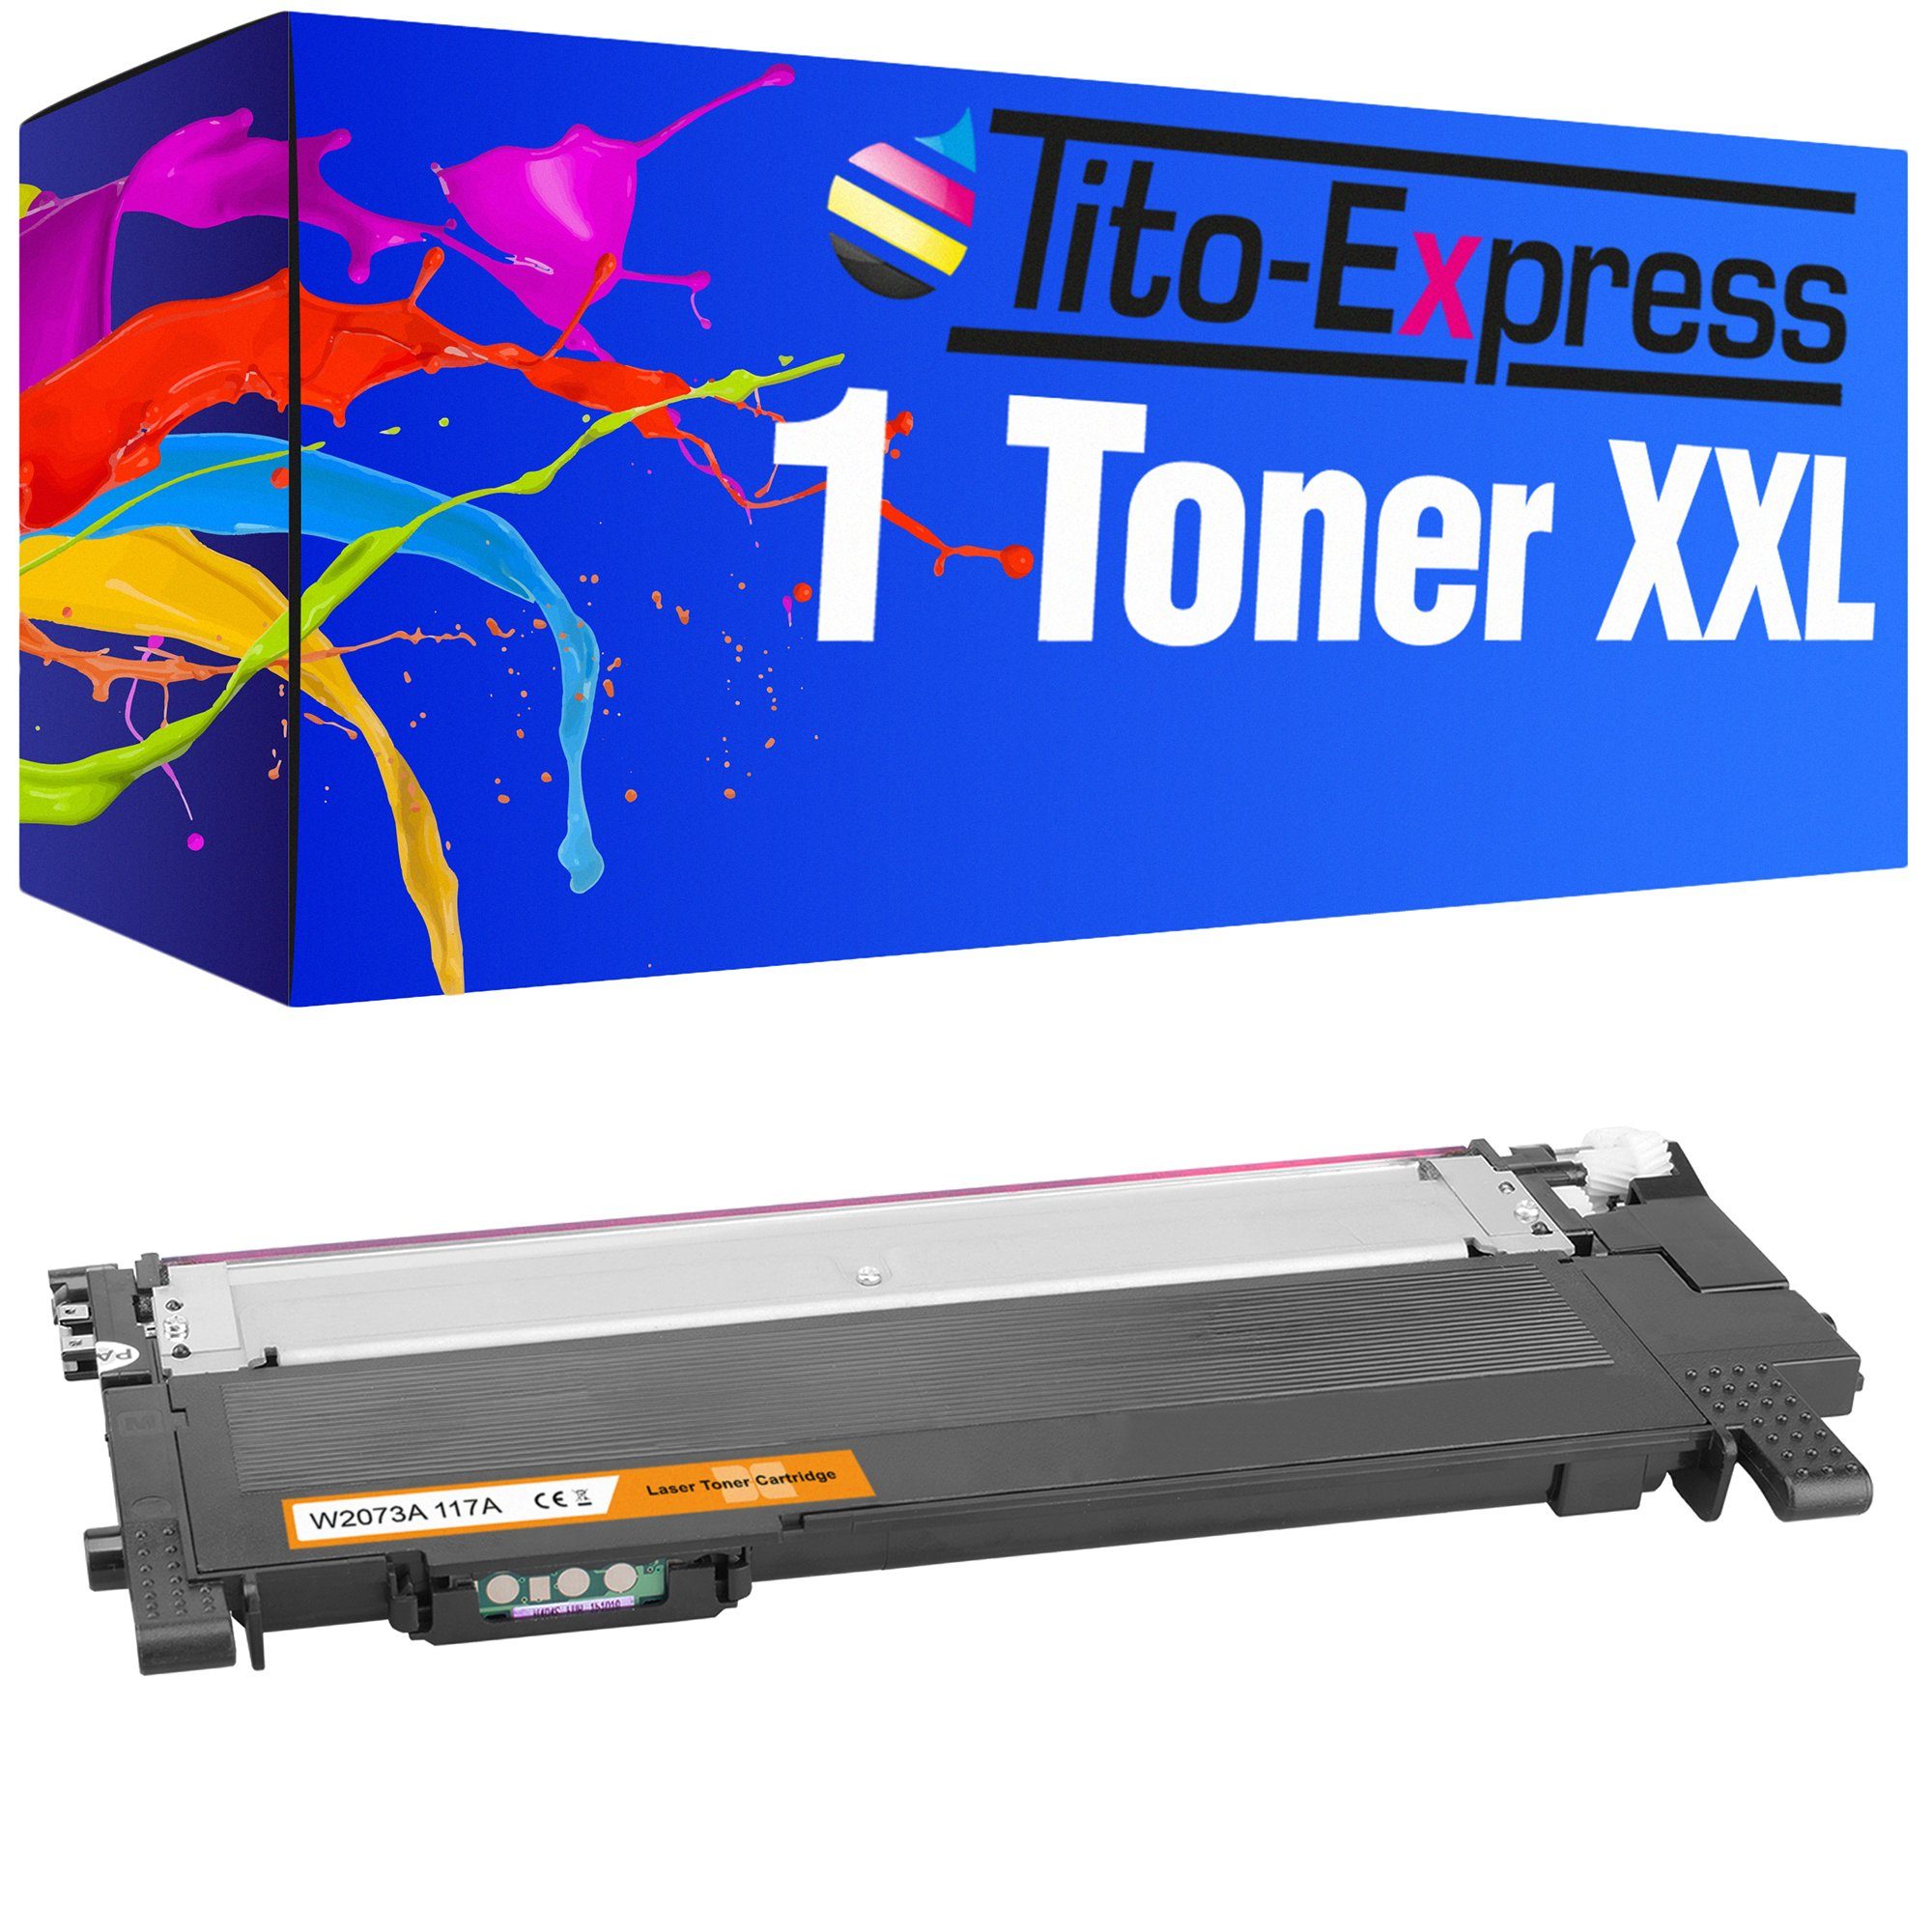 Tito-Express Tonerpatrone ersetzt HP W2070A W 2070 A HP 117A, (1x Magenta), für Color Laser MFP 178nwg 179fwg 150nw 179fnw 150a 178nw MFP-170